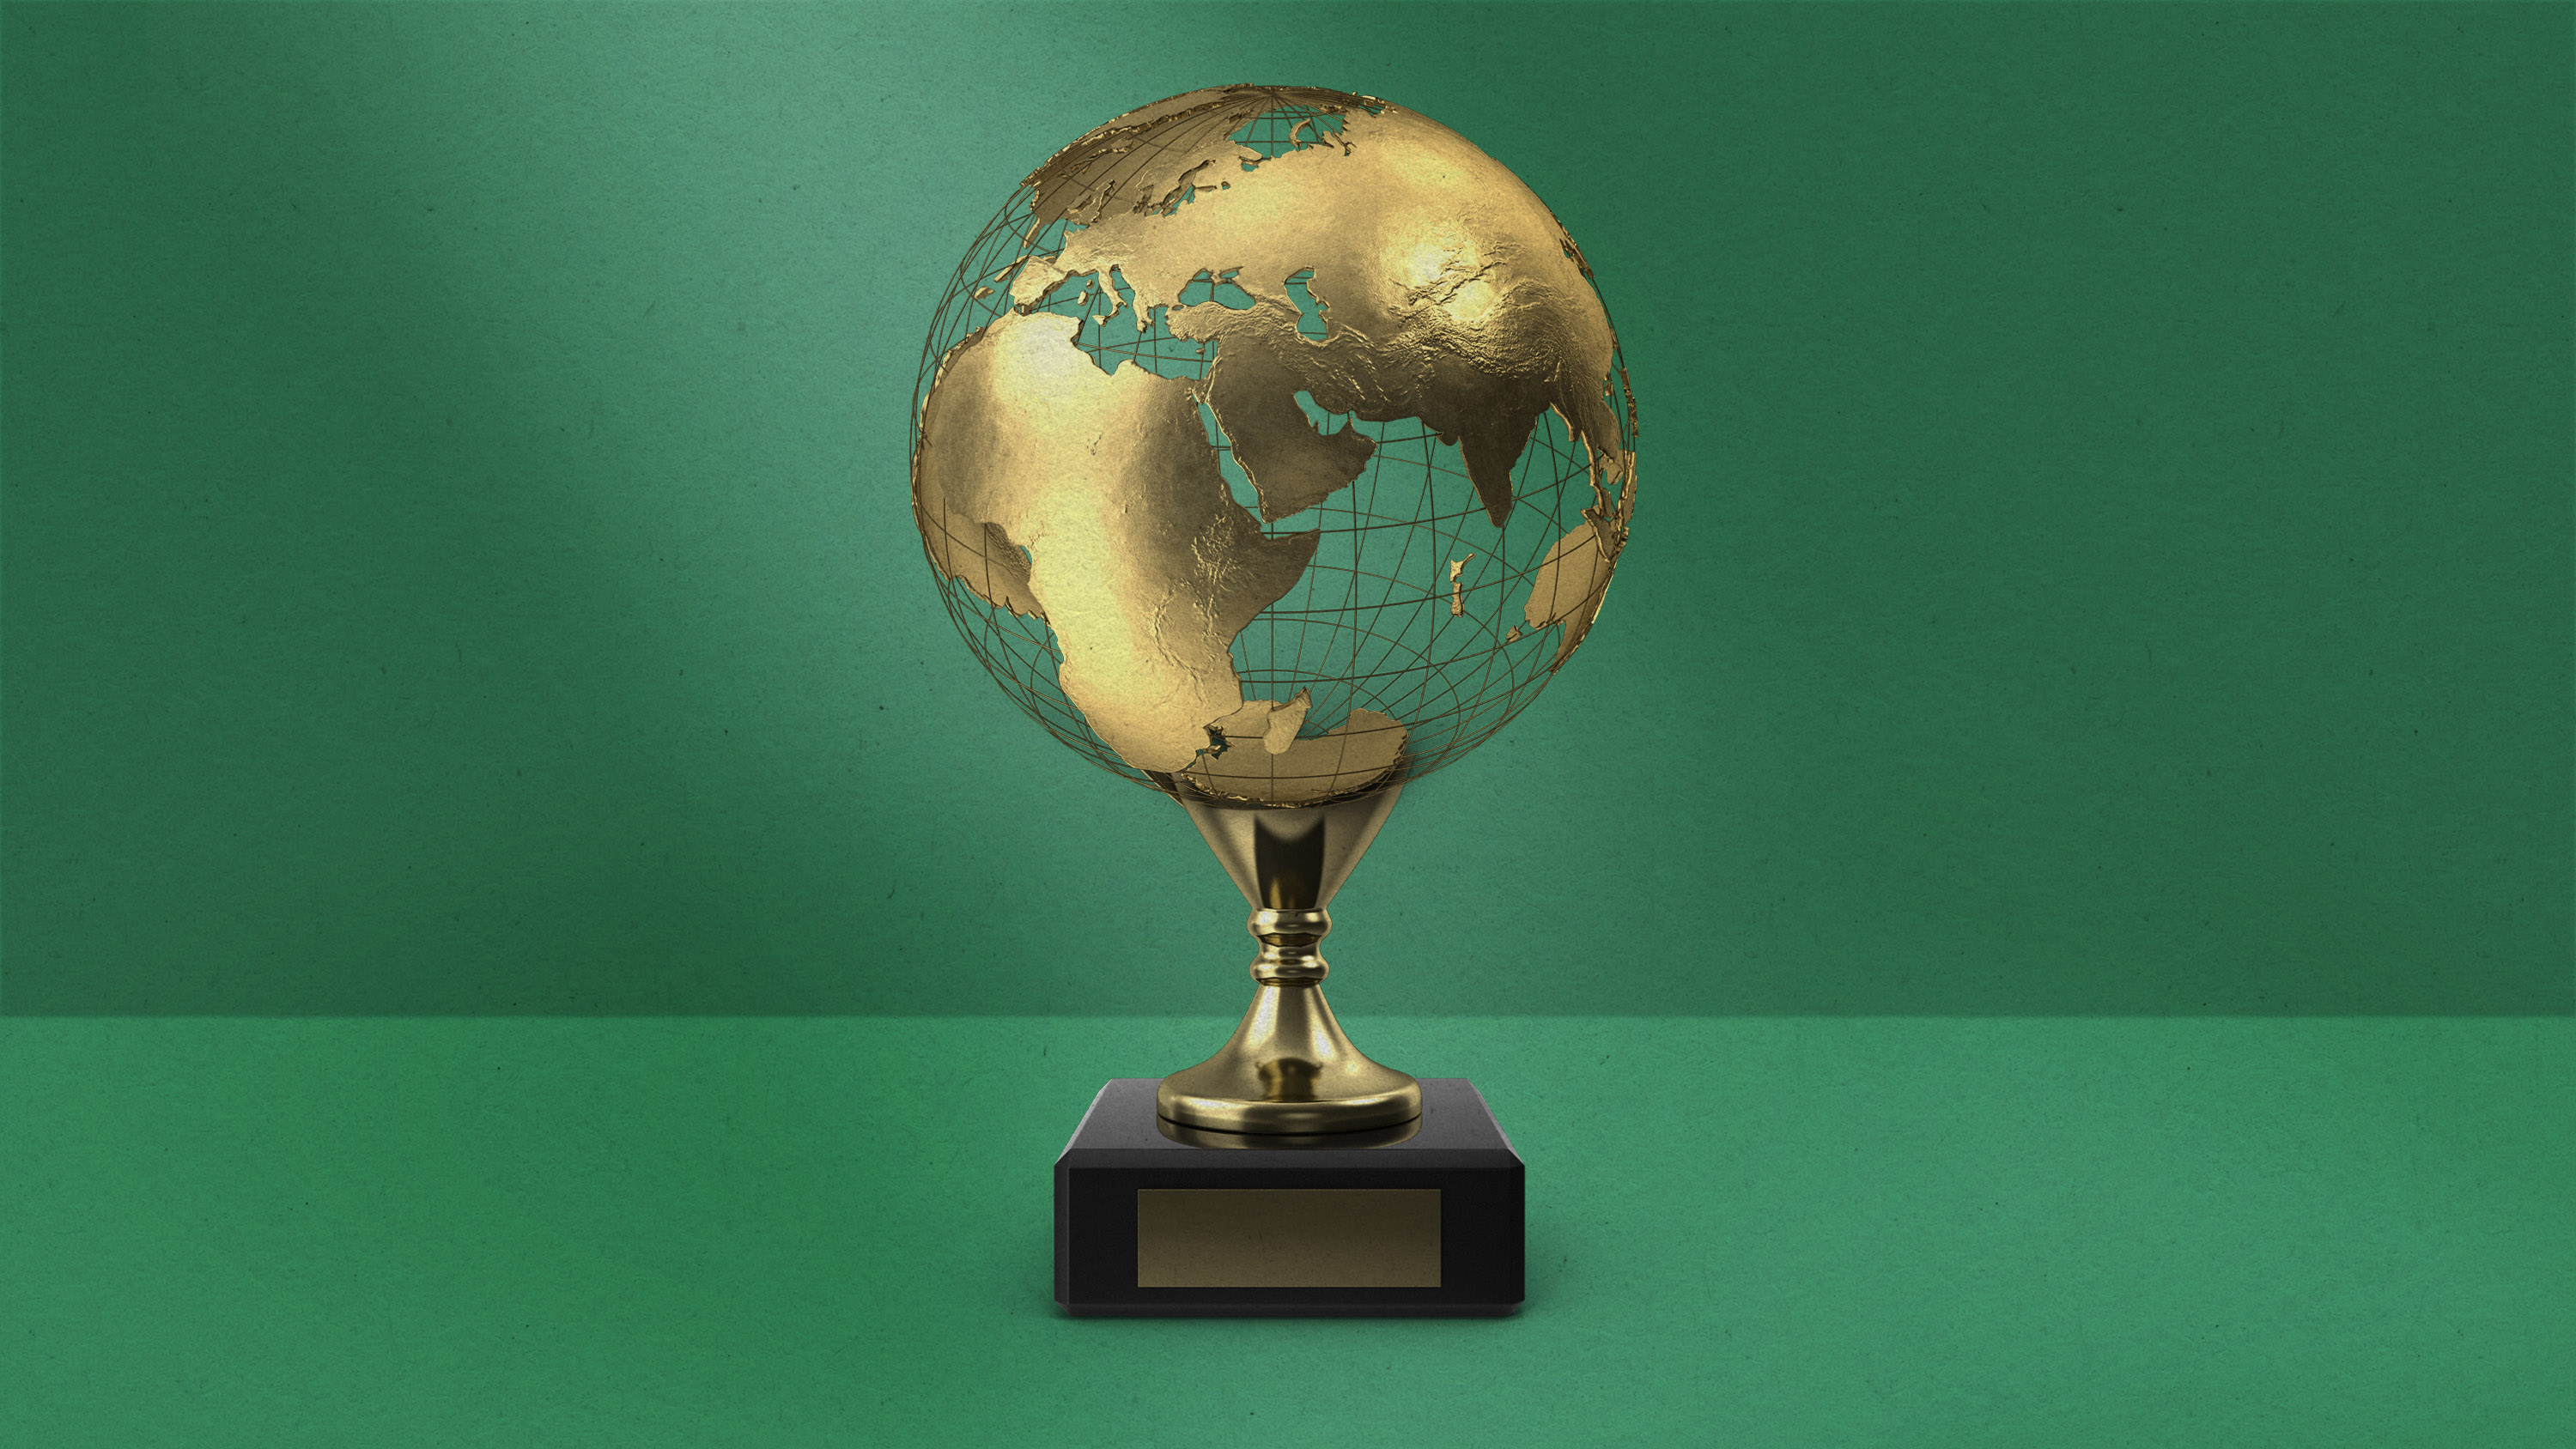 a trophy with a golden globe as the top